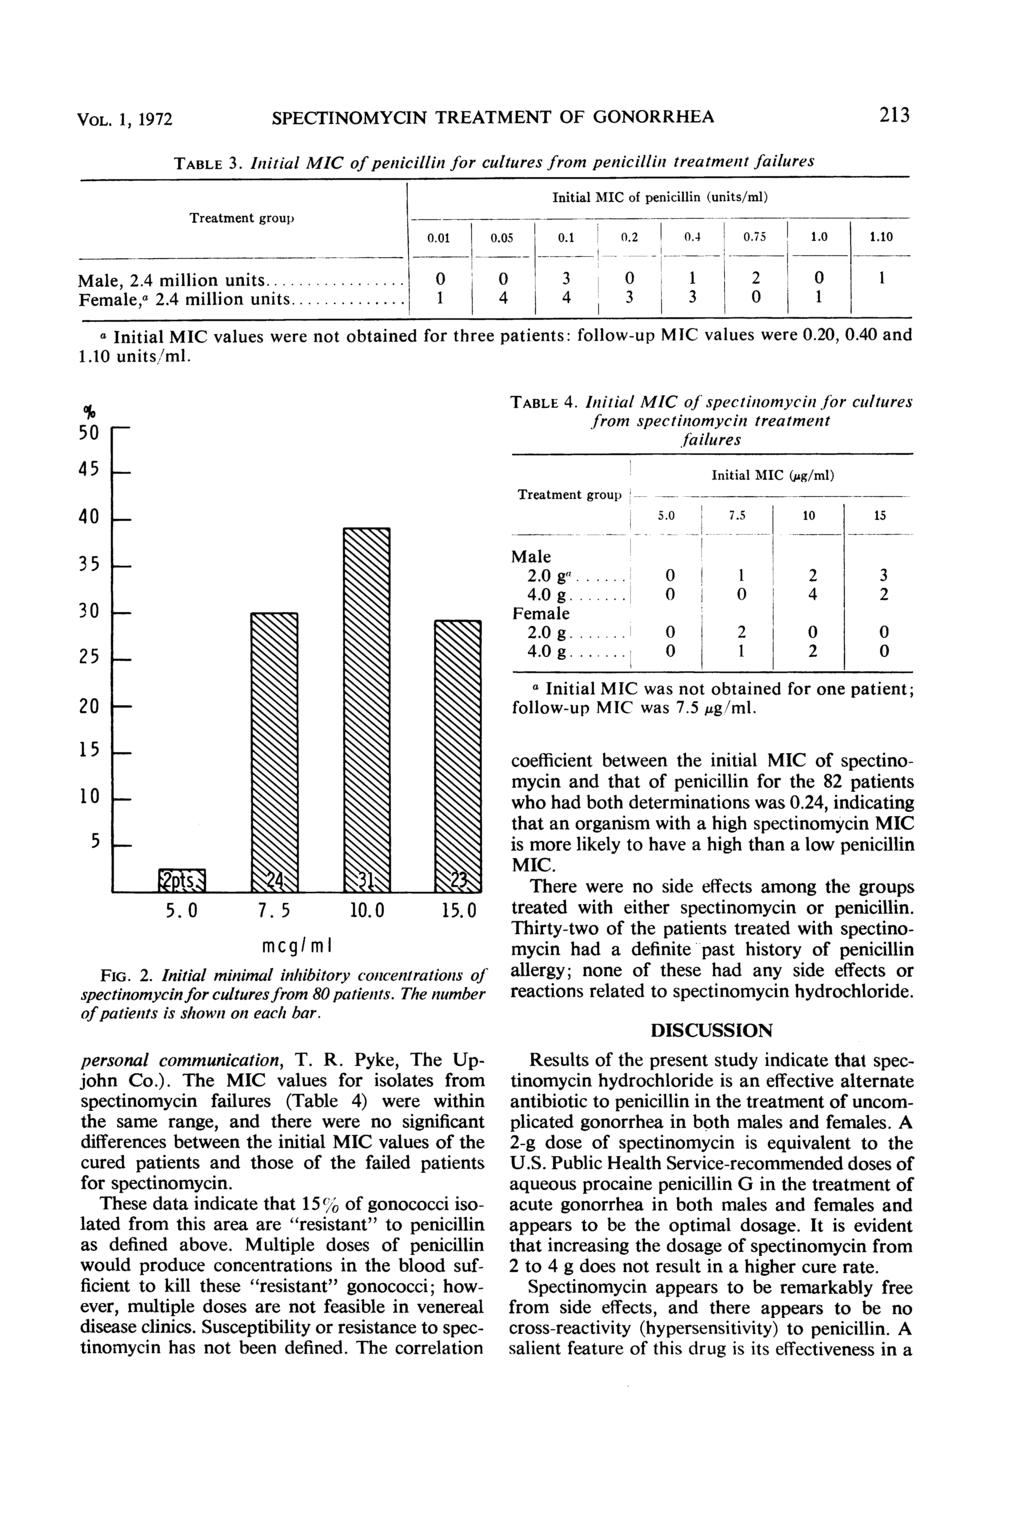 VOL. 1, 1972 SPECTINOMYCIN TREATMENT OF GONORRHEA 213 TABLE 3. Iniitial MIC of penticillin for cultures from penicillini treatmentt failures Initial MIC of penicillin (units/ml) Treatment group 0.